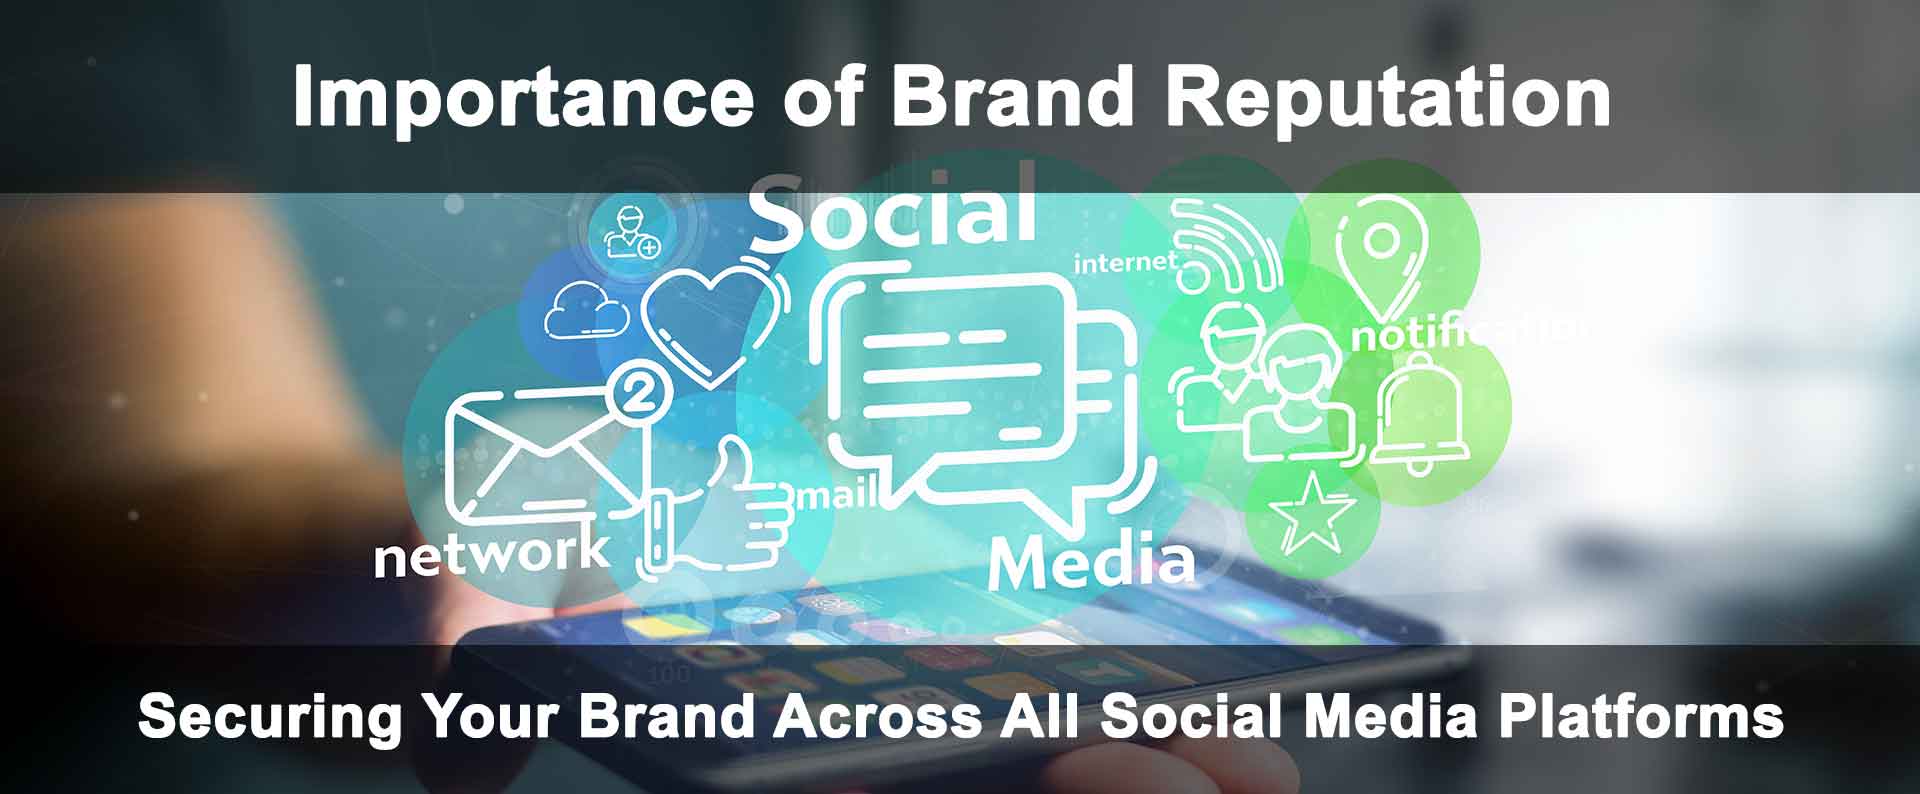 Securing Your Brand Across All Social Media Platforms